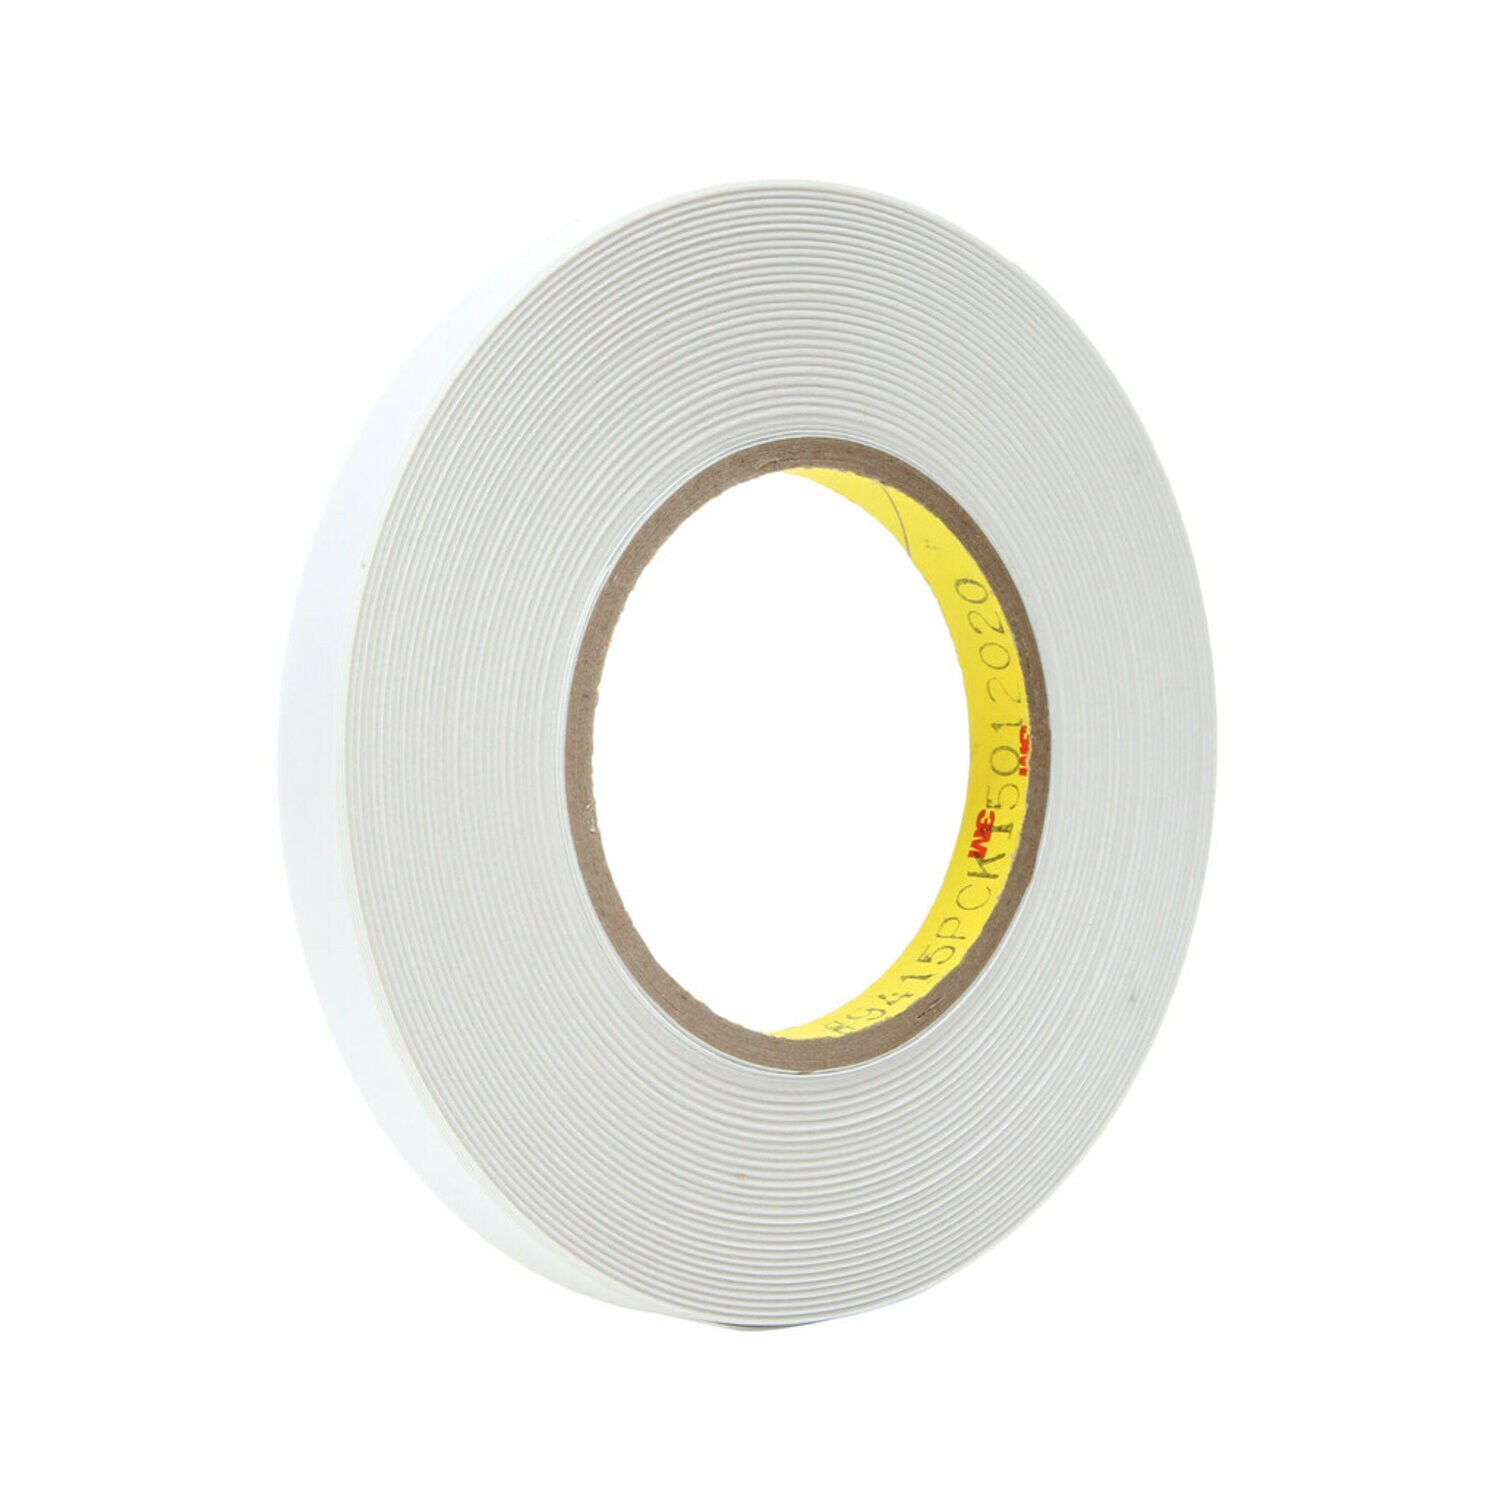 7010300200 - 3M Removable Repositionable Tape 9415PC, Clear, 4 in x 72 yd, 2 mil, 8
Rolls/Case